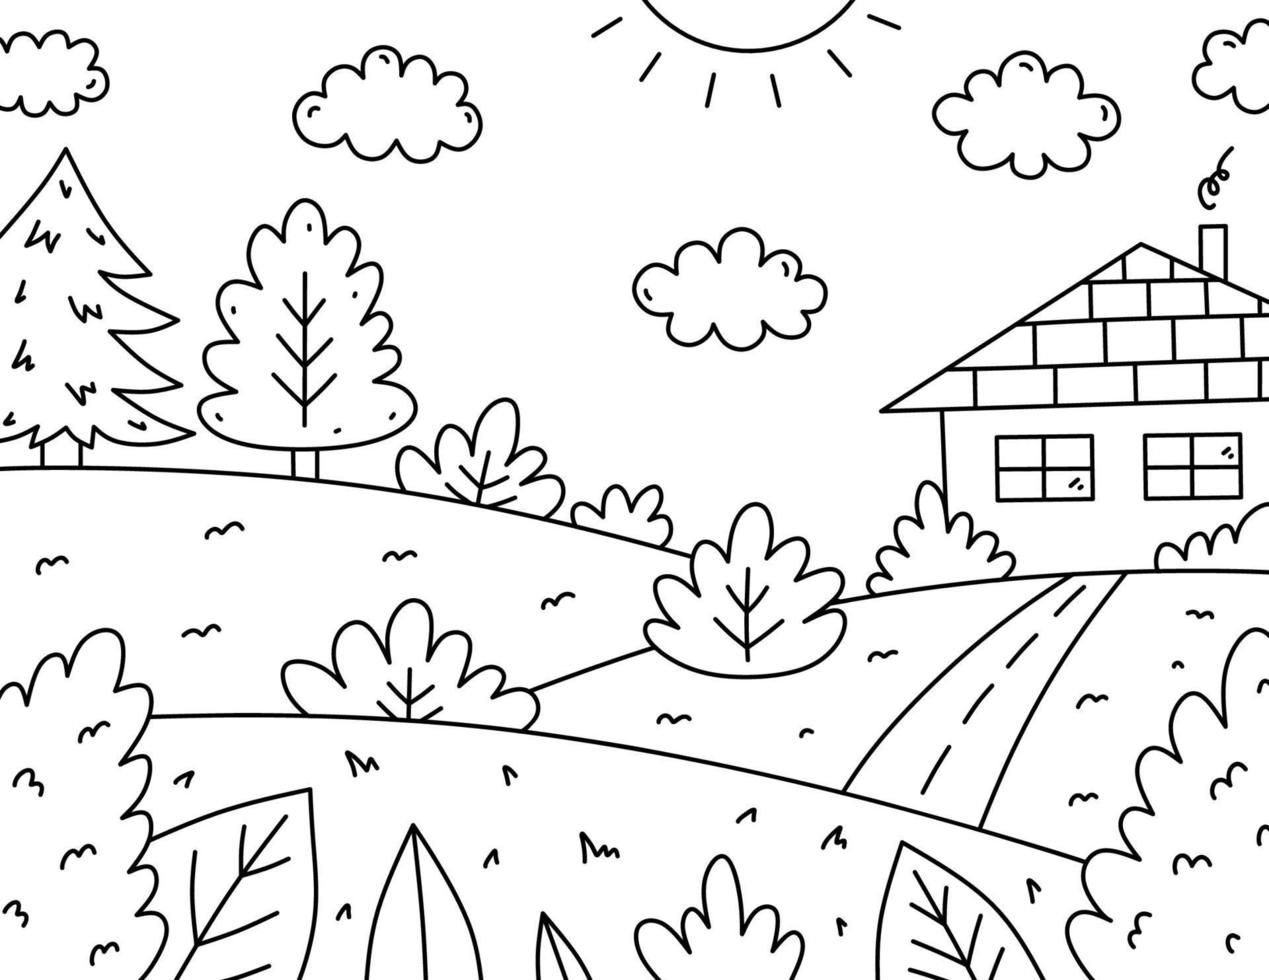 Cute kids coloring page. Landscape with house, trees, bushes, field and road. Vector hand-drawn illustration in doodle style. Cartoon coloring book for children.